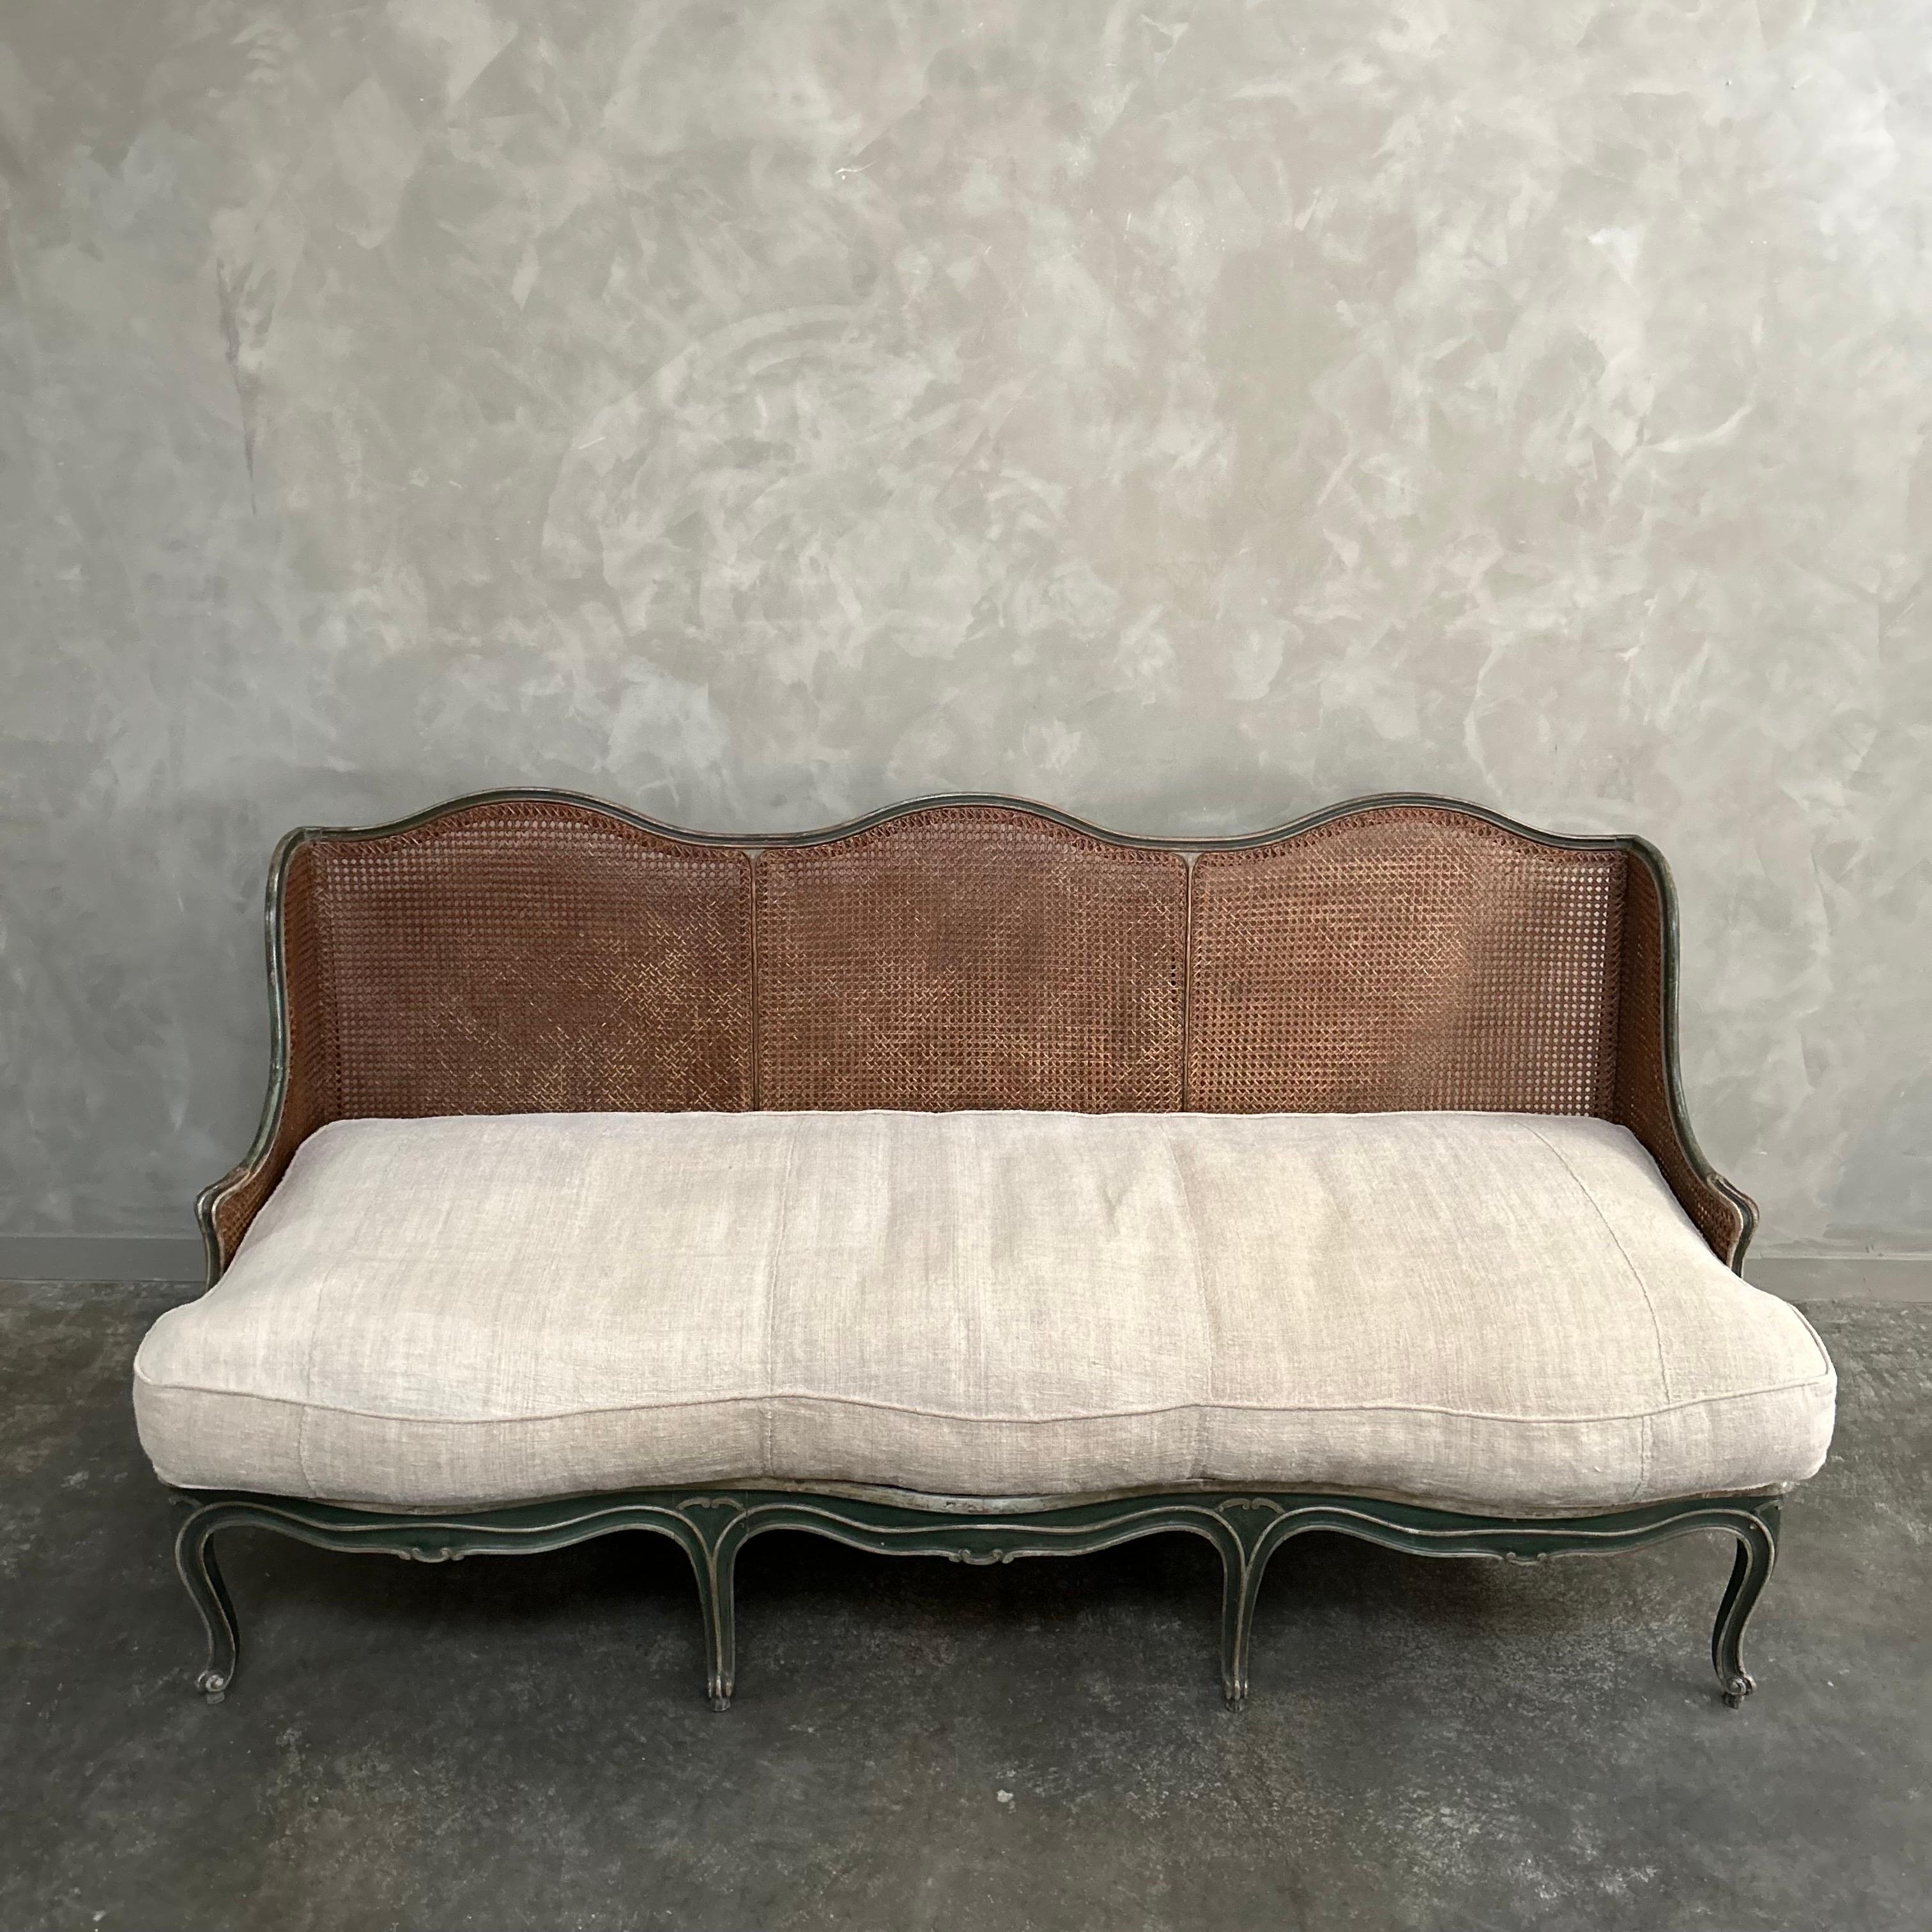 Louis XV Vintage Rococo Cane Sofa Upholstered in European Hemp Linen Fabric with Down For Sale